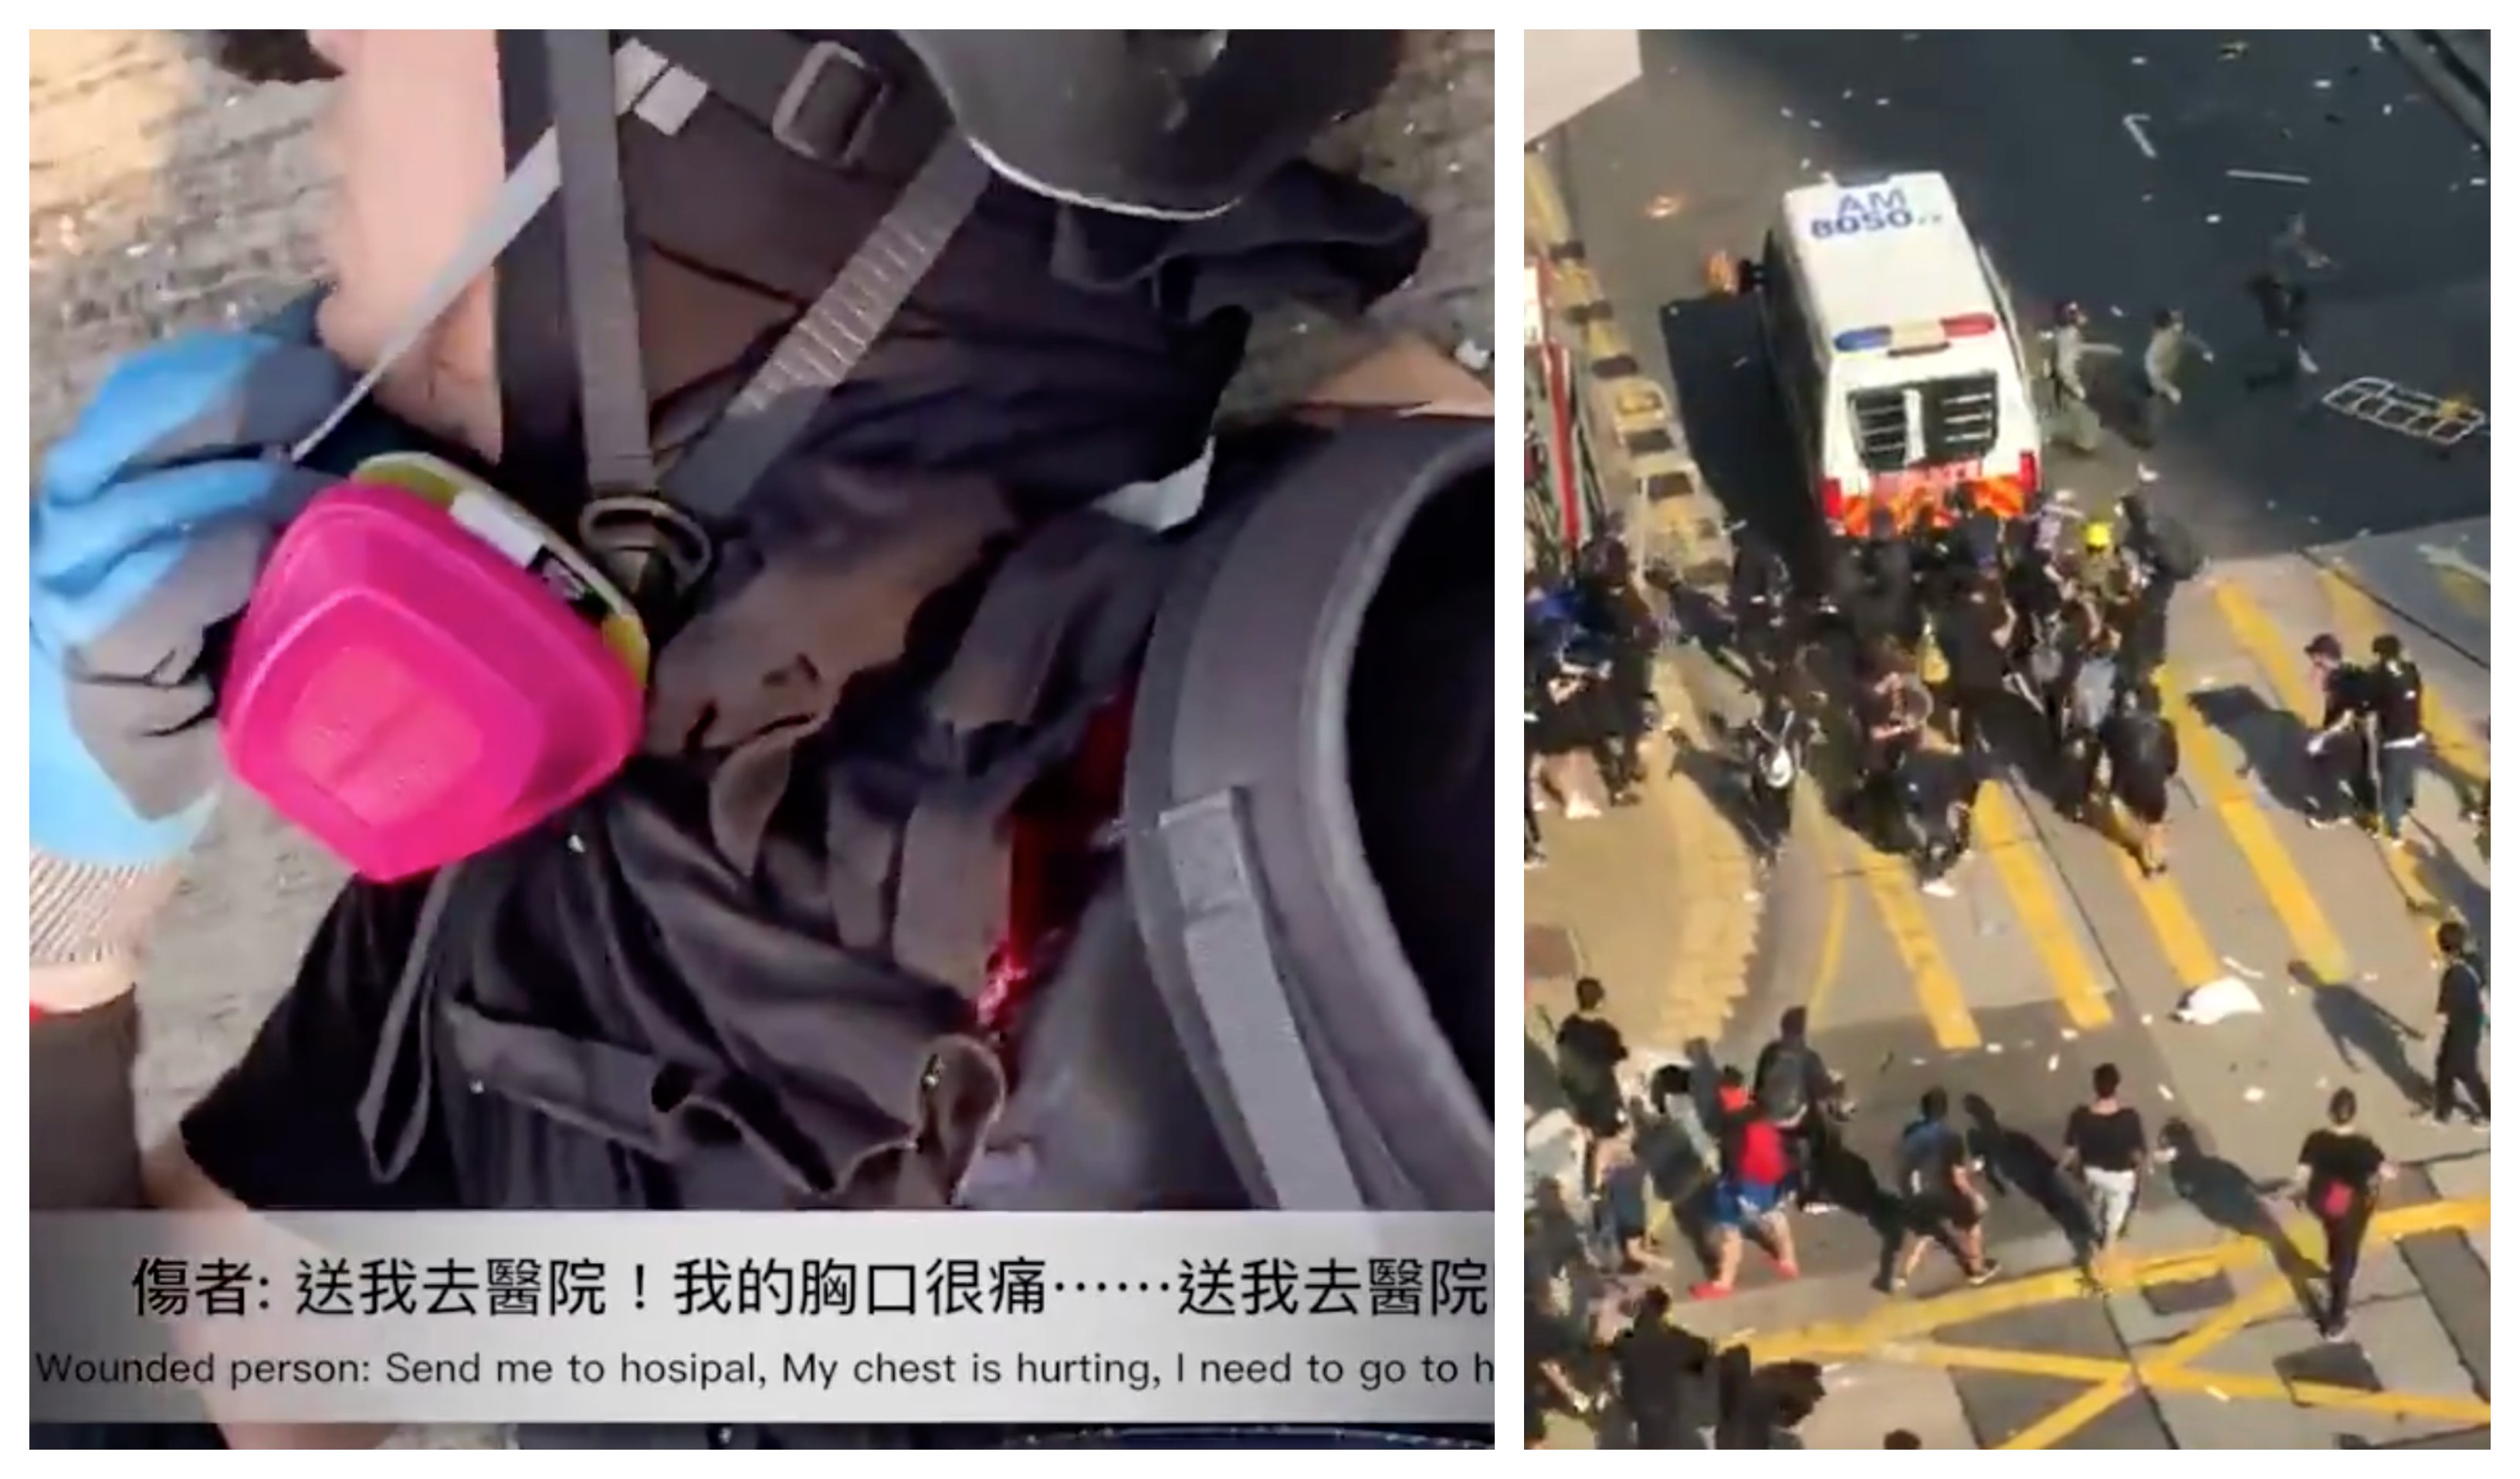 A man was allegedly shot in the chest by a live round in Tsuen Wan (left), and police fired warning shots in Yau Ma Tei (right) as National Day protests raged across the city. Screengrabs via Twitter.